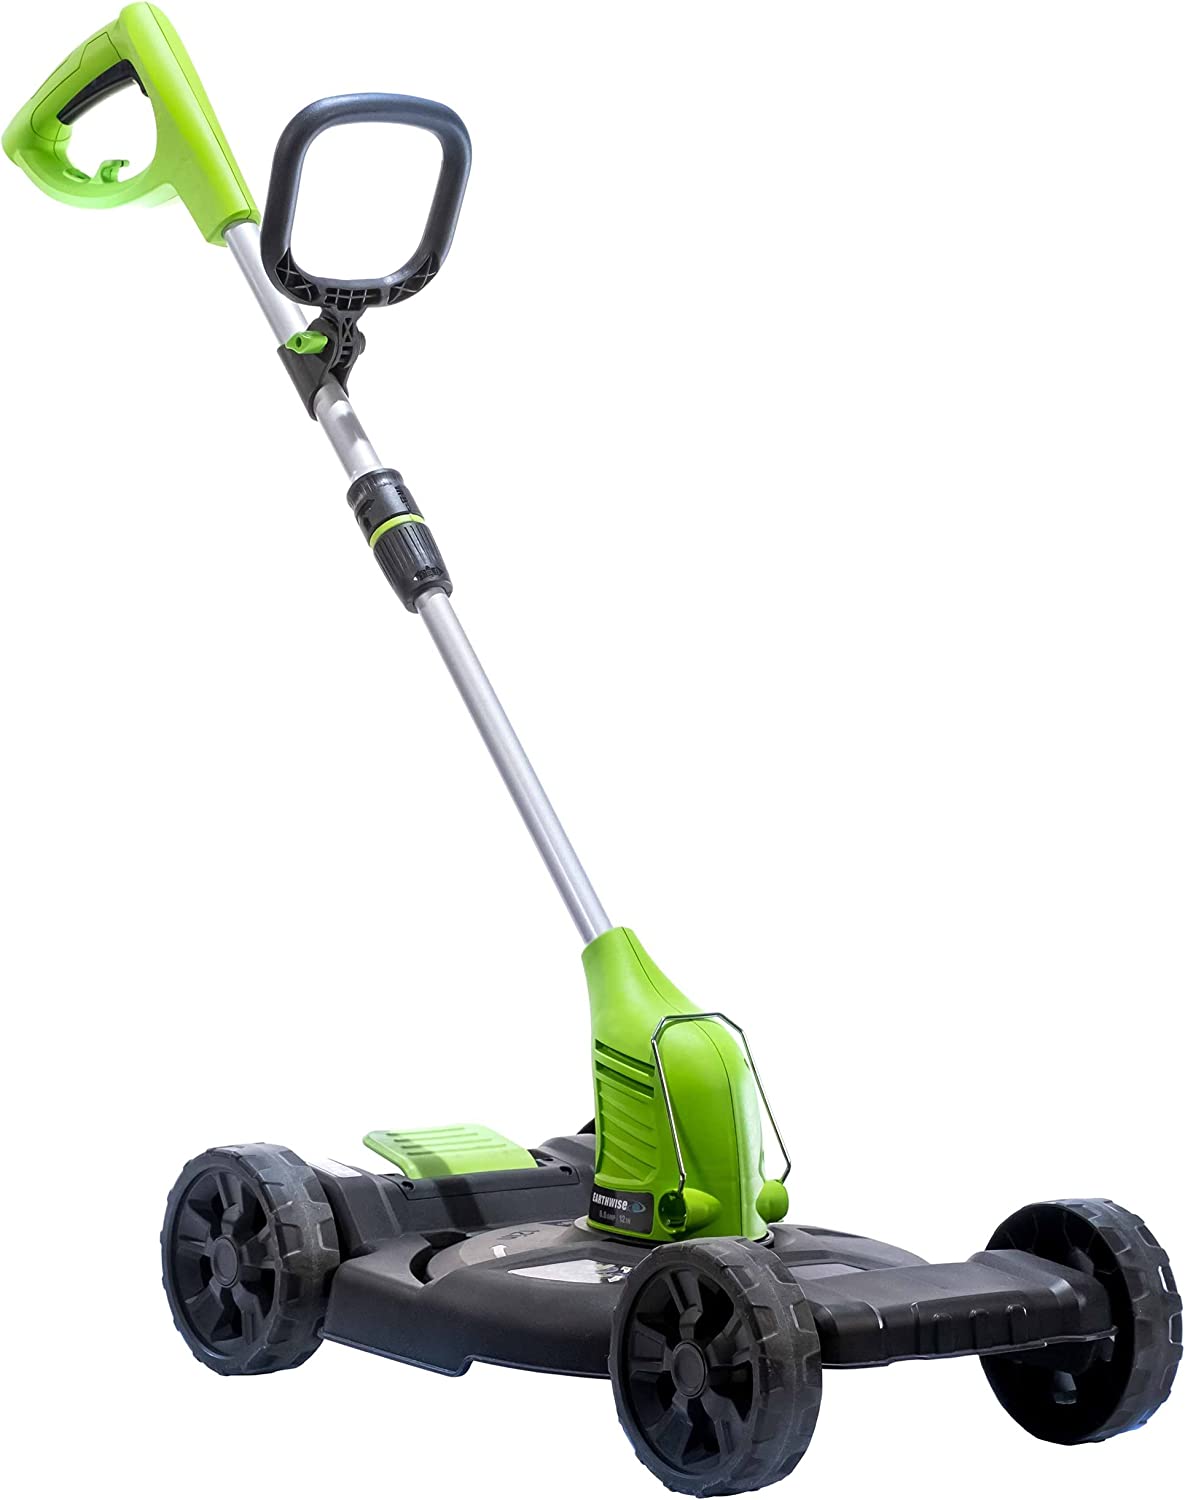 Earthwise 5.5A 12 Corded String Trimmer/Mower Combo – American